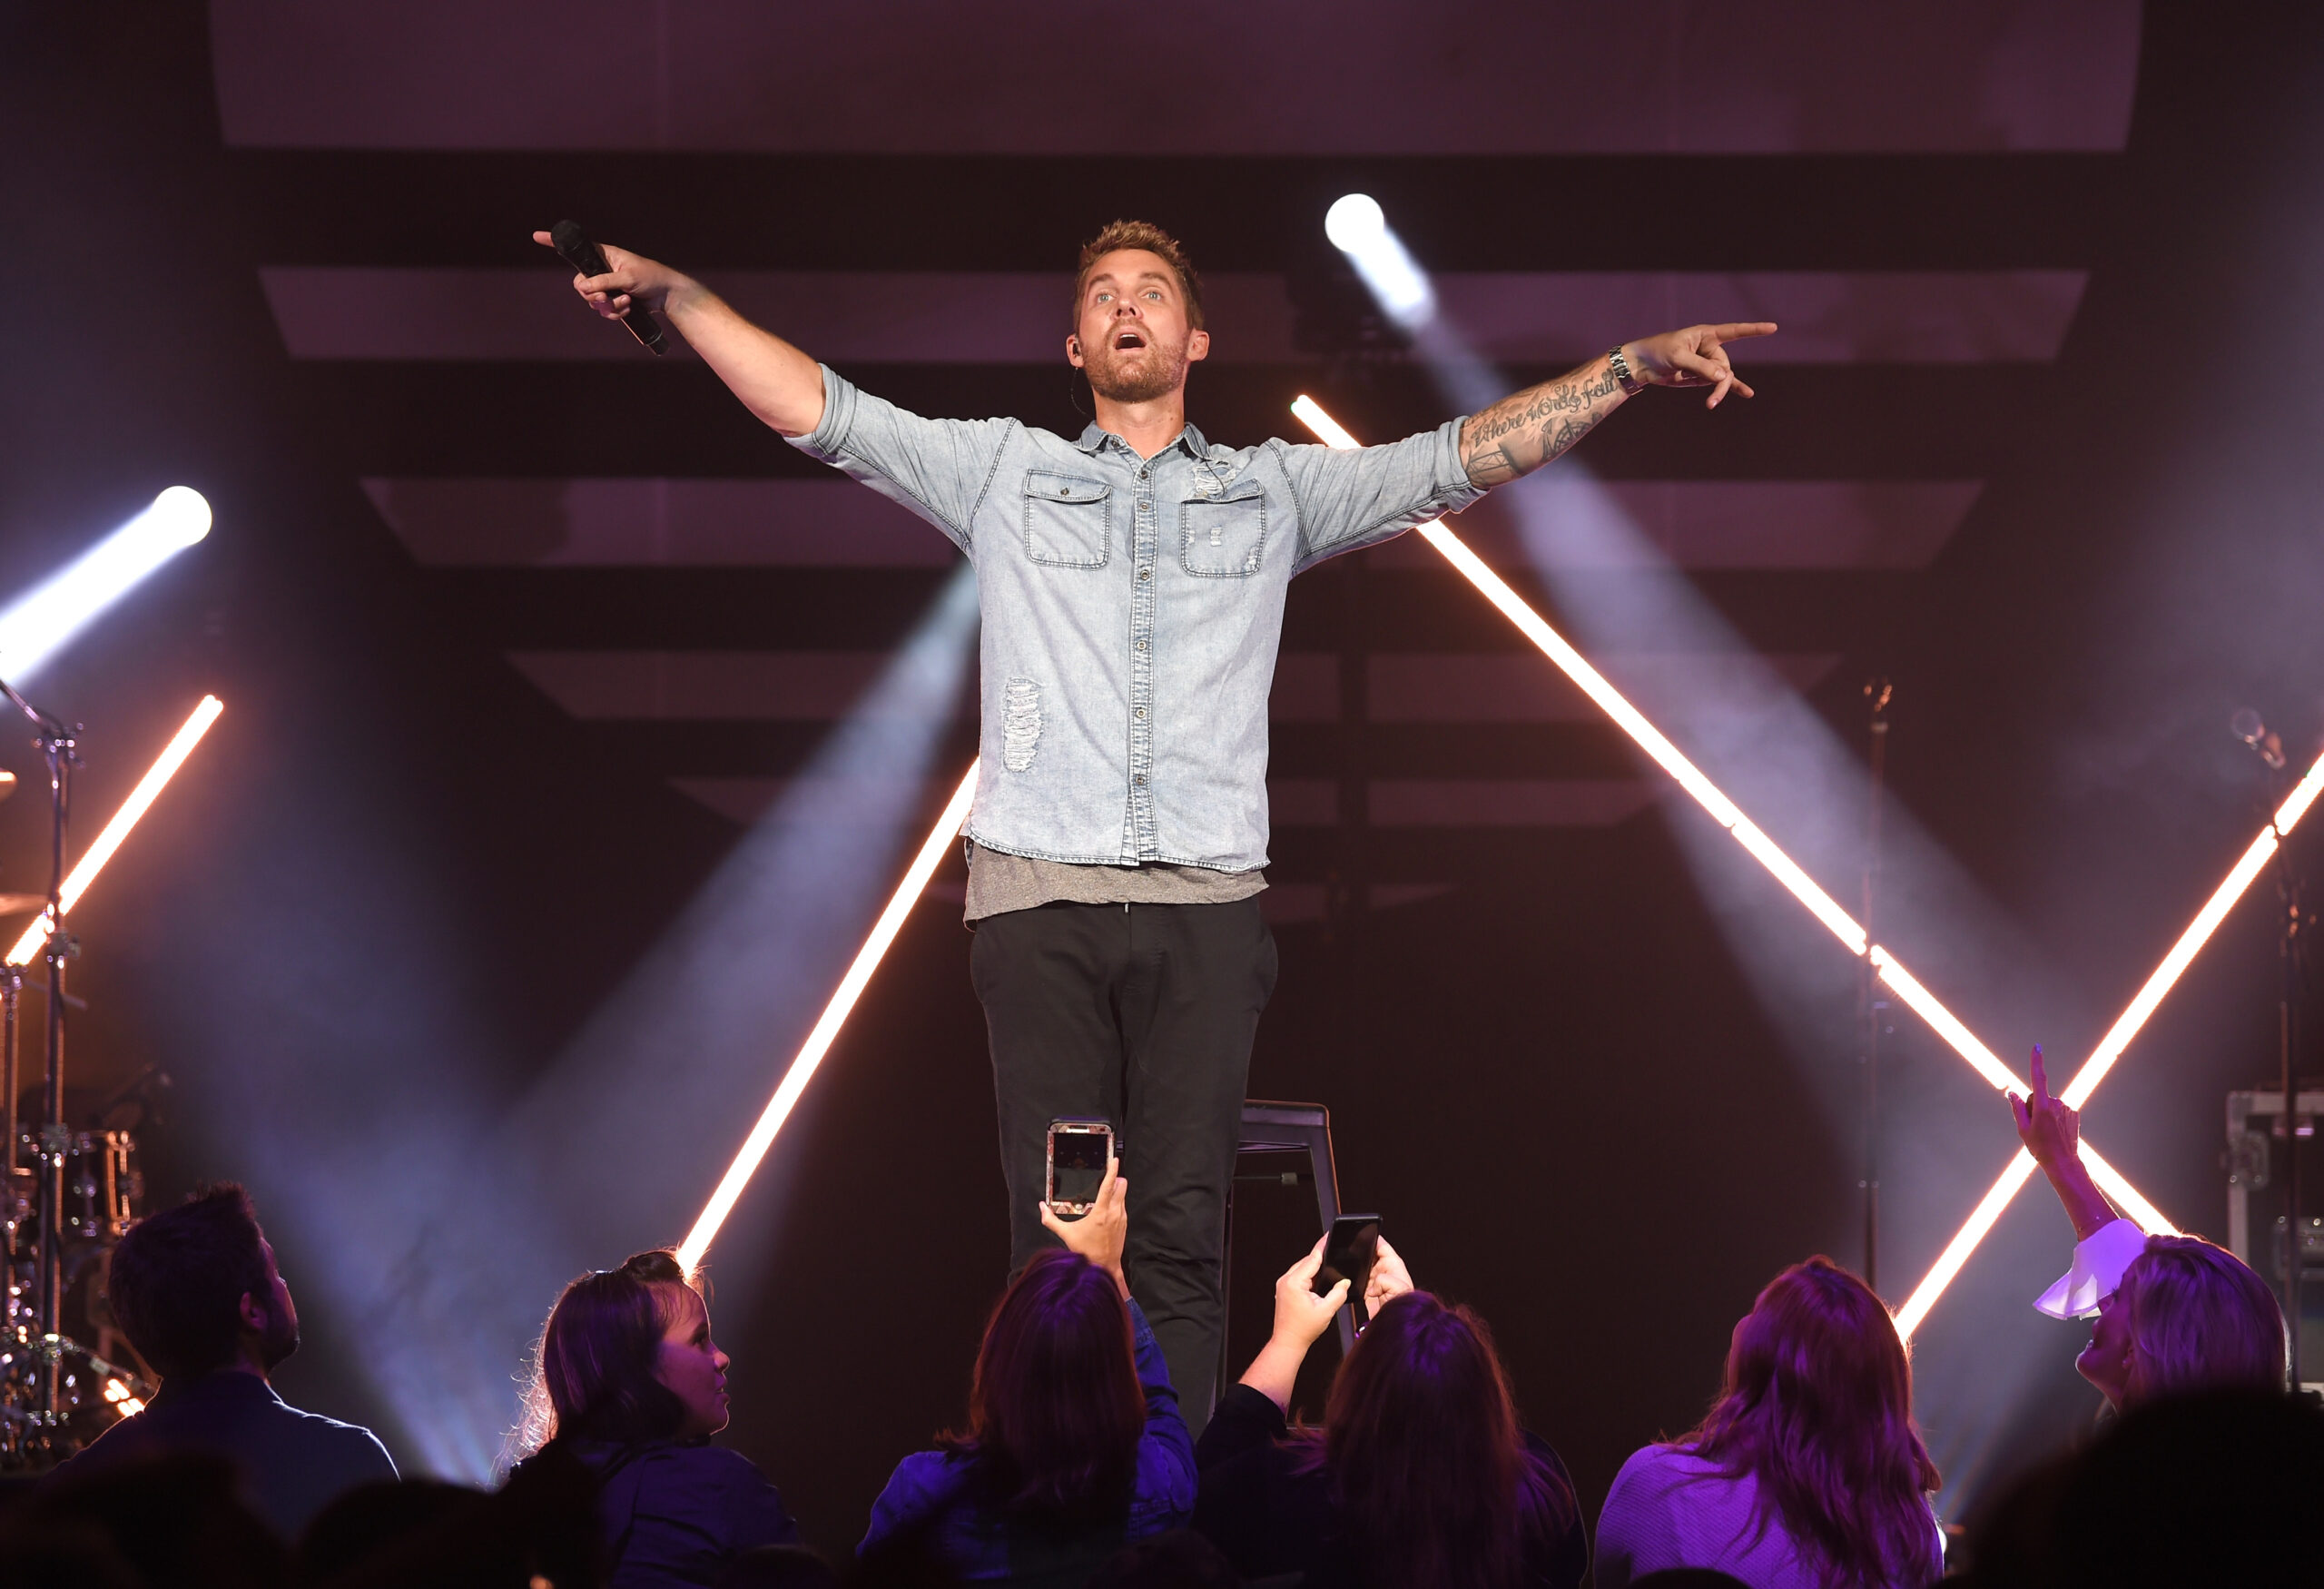 <h1 class="tribe-events-single-event-title">Win your tickets to see Brett Young @ Rosemont Theatre!</h1>